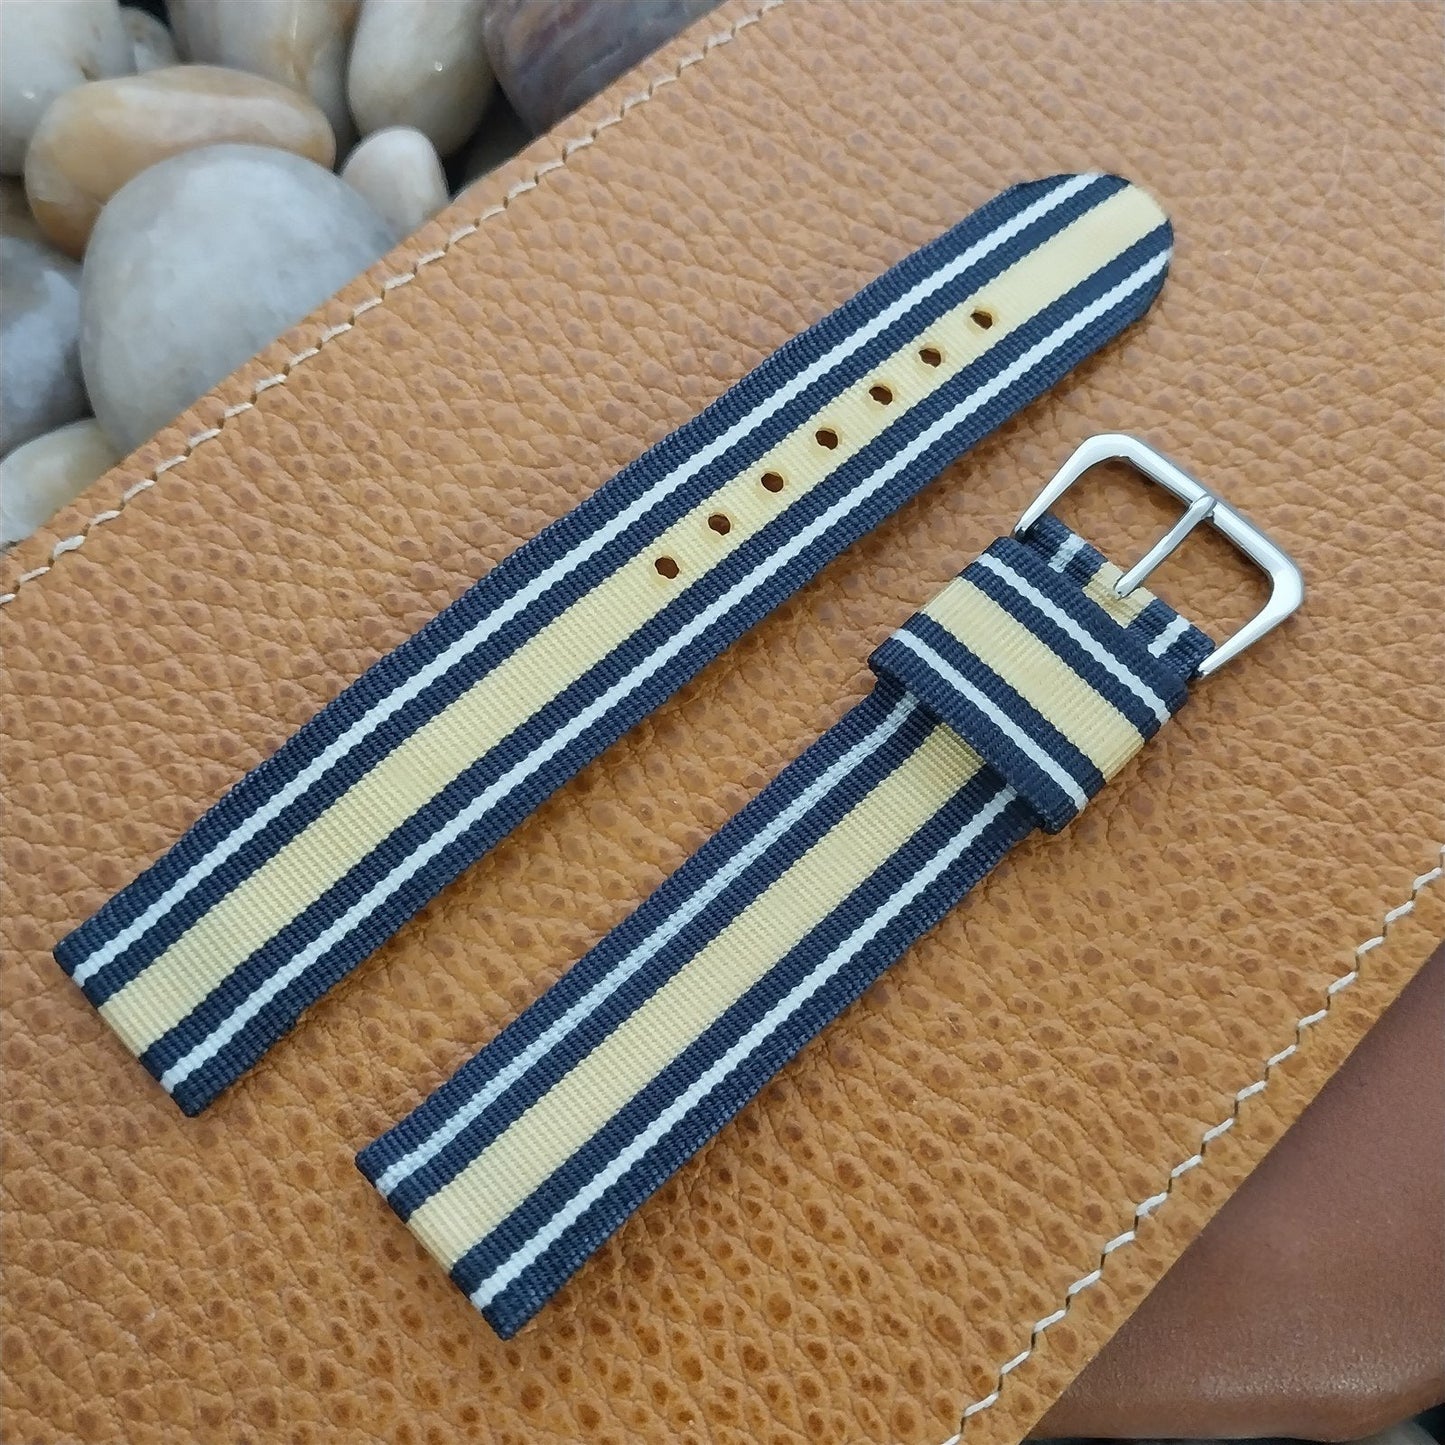 18mm Striped Nylon 2-piece Tropical nos 1960s Vintage Watch Band